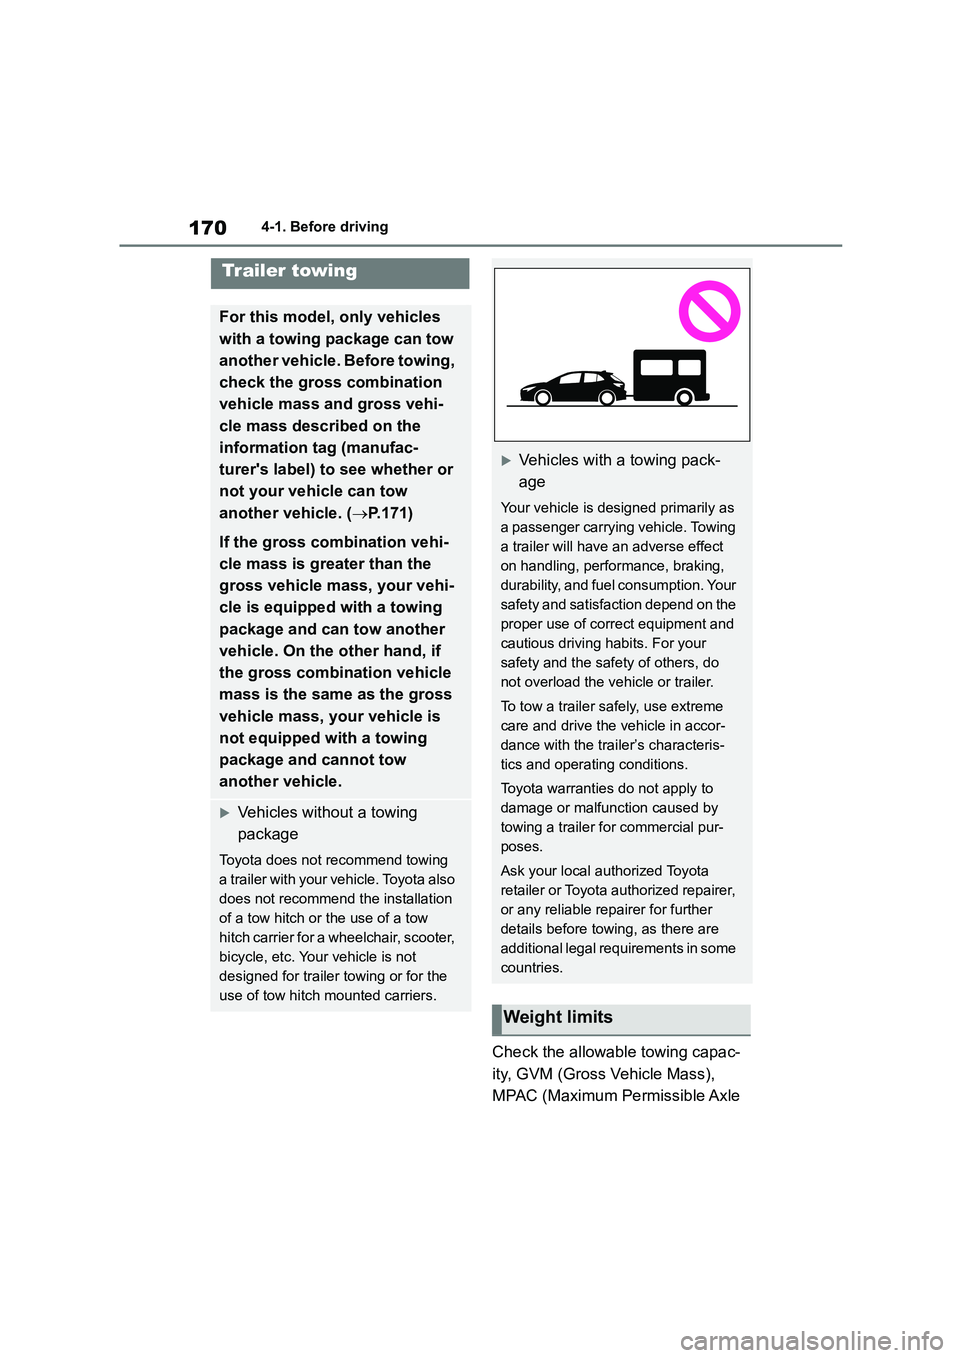 TOYOTA COROLLA HATCHBACK 2022  Owners Manual (in English) 1704-1. Before driving
Check the allowable towing capac- 
ity, GVM (Gross Vehicle Mass), 
MPAC (Maximum Permissible Axle 
Trailer towing
For this model, only vehicles 
with a towing package can tow 
a